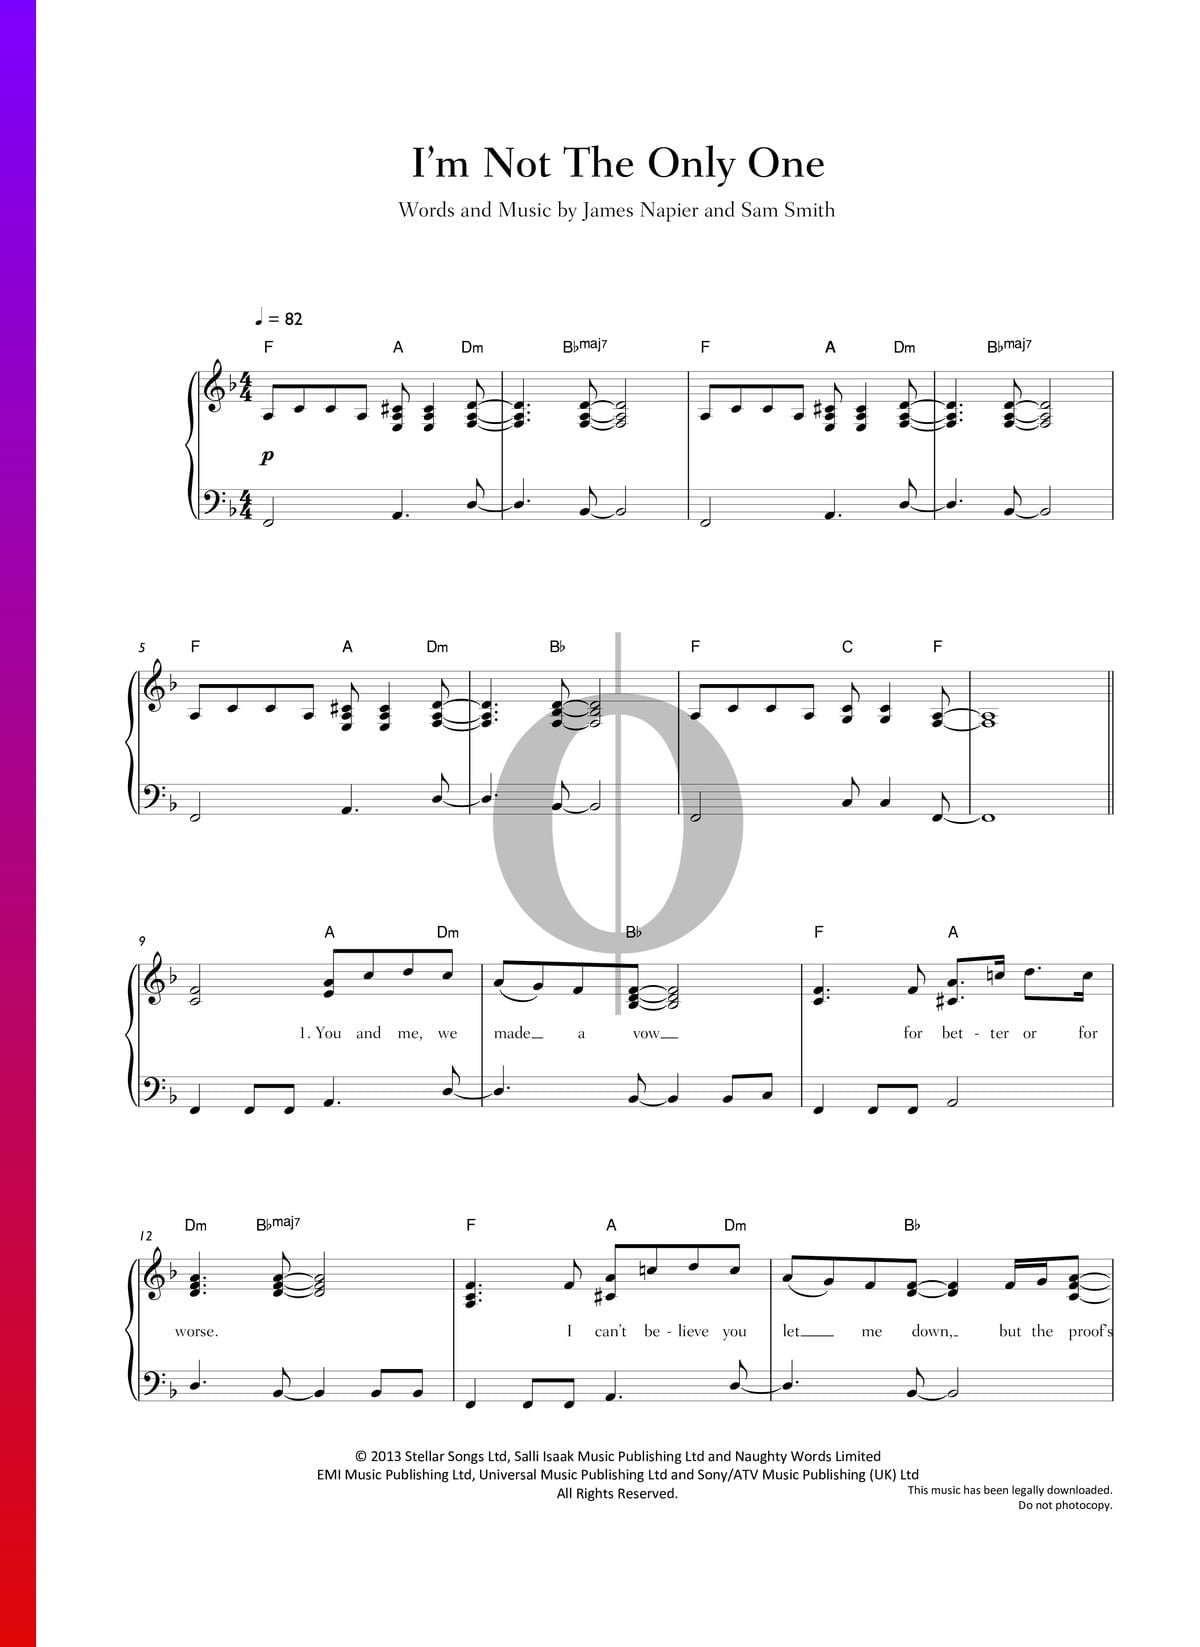 I M Not The Only One Sheet Music Piano Voice Pdf Download Streaming Oktav